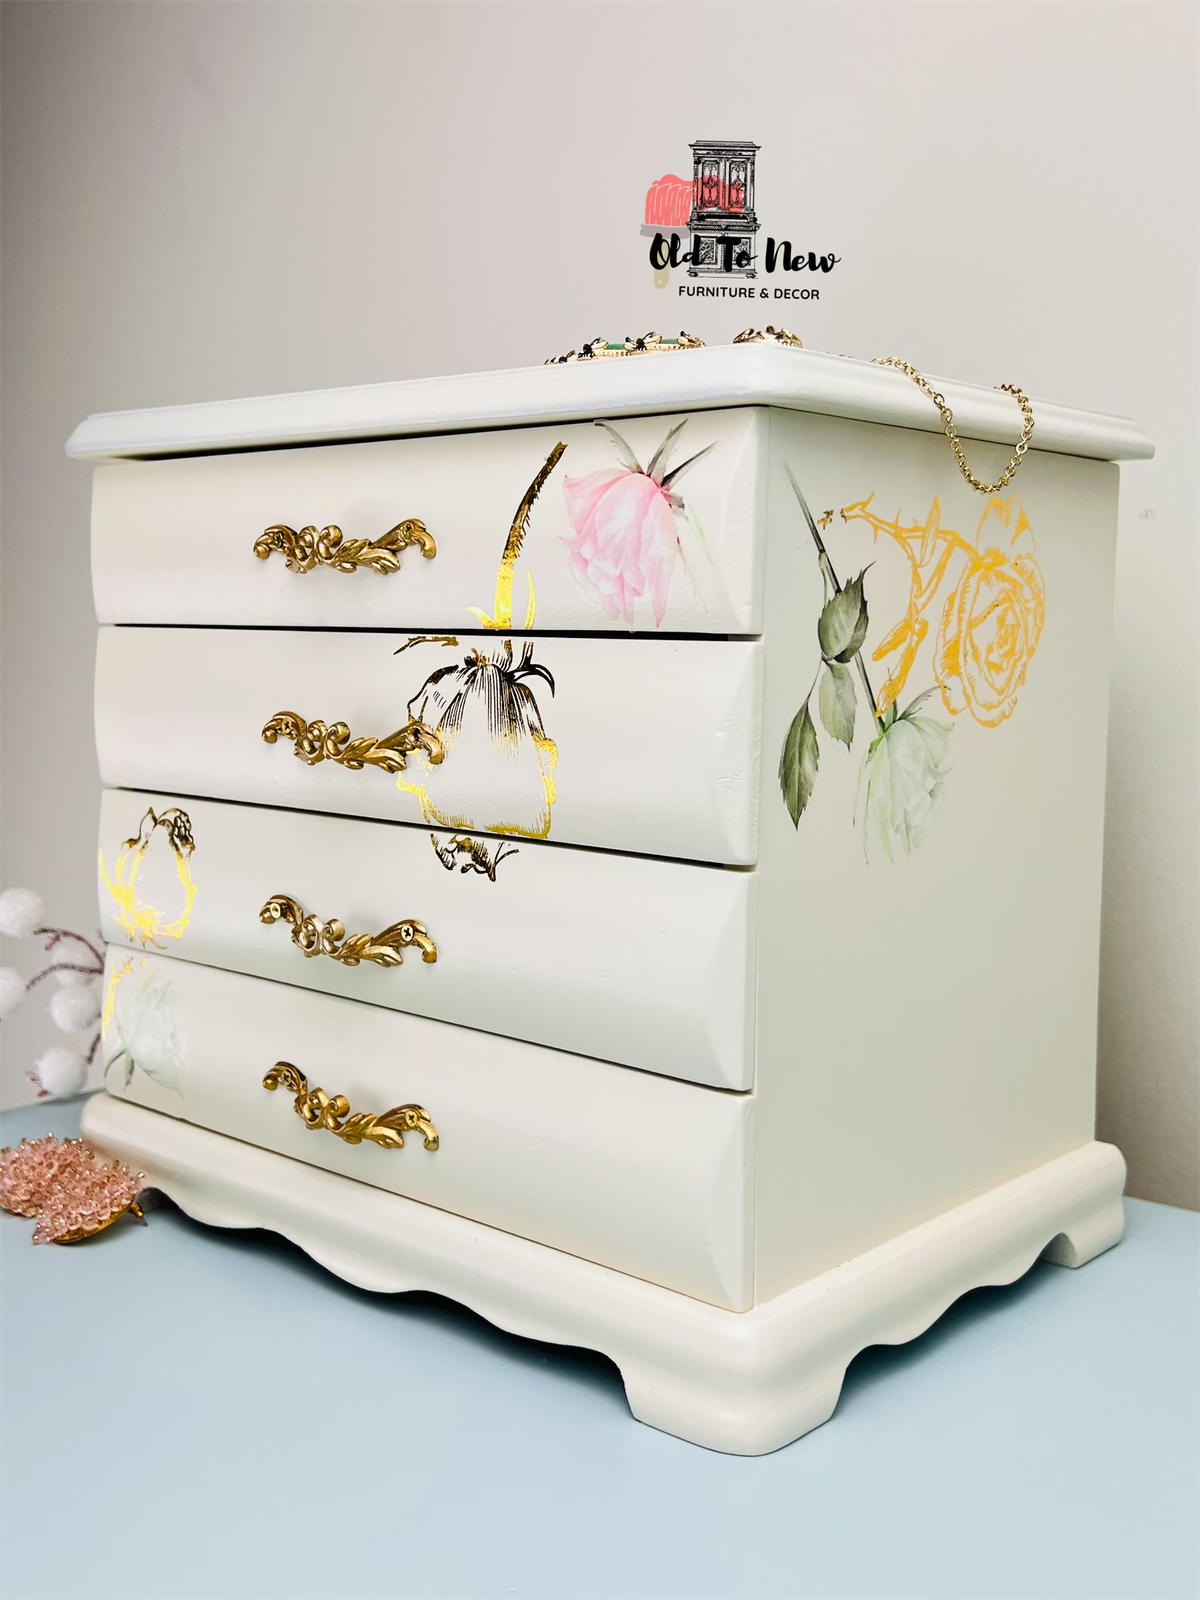 Vintage Jewelry Box Painted with Flower  Designs Applied